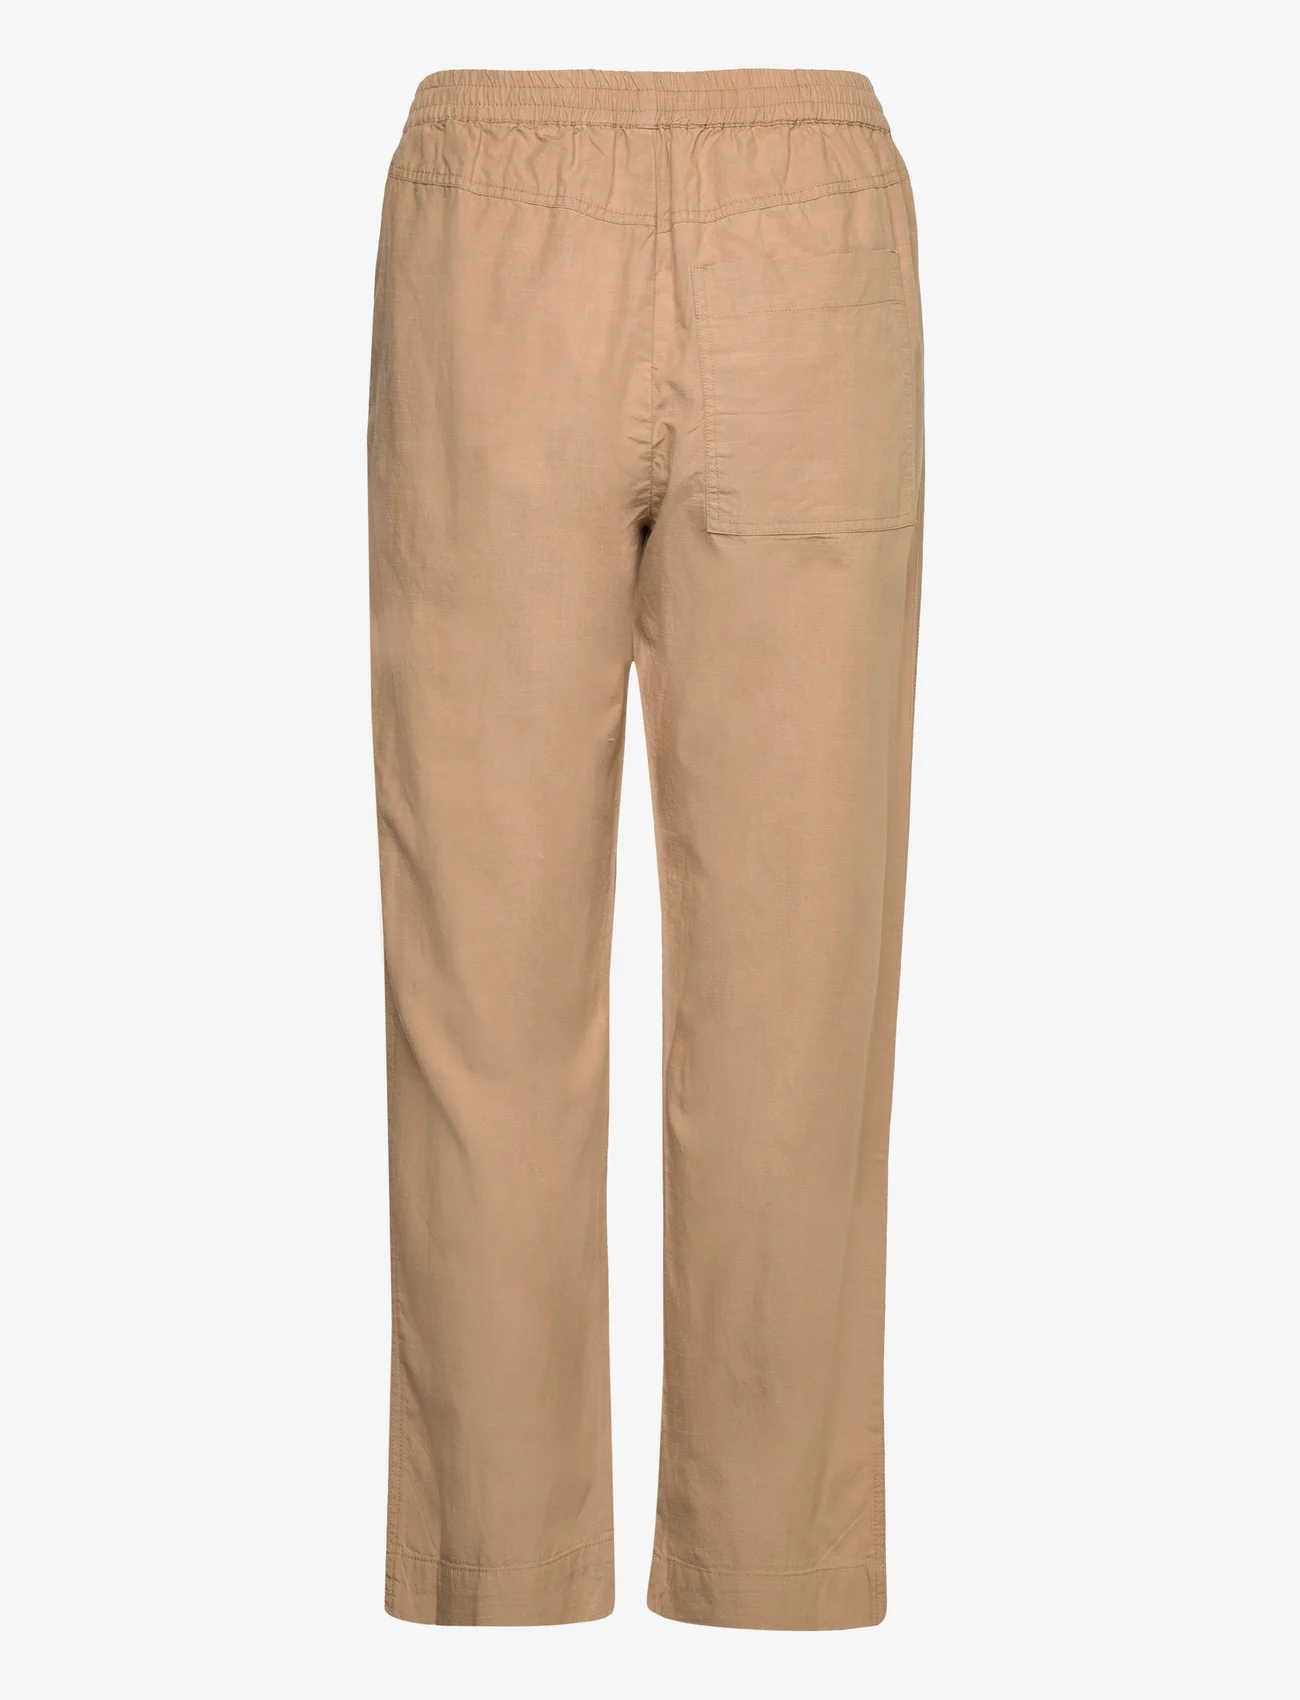 French Connection - ALANIA LYOCELL BLEND TROUSER - suorat housut - incense - 1